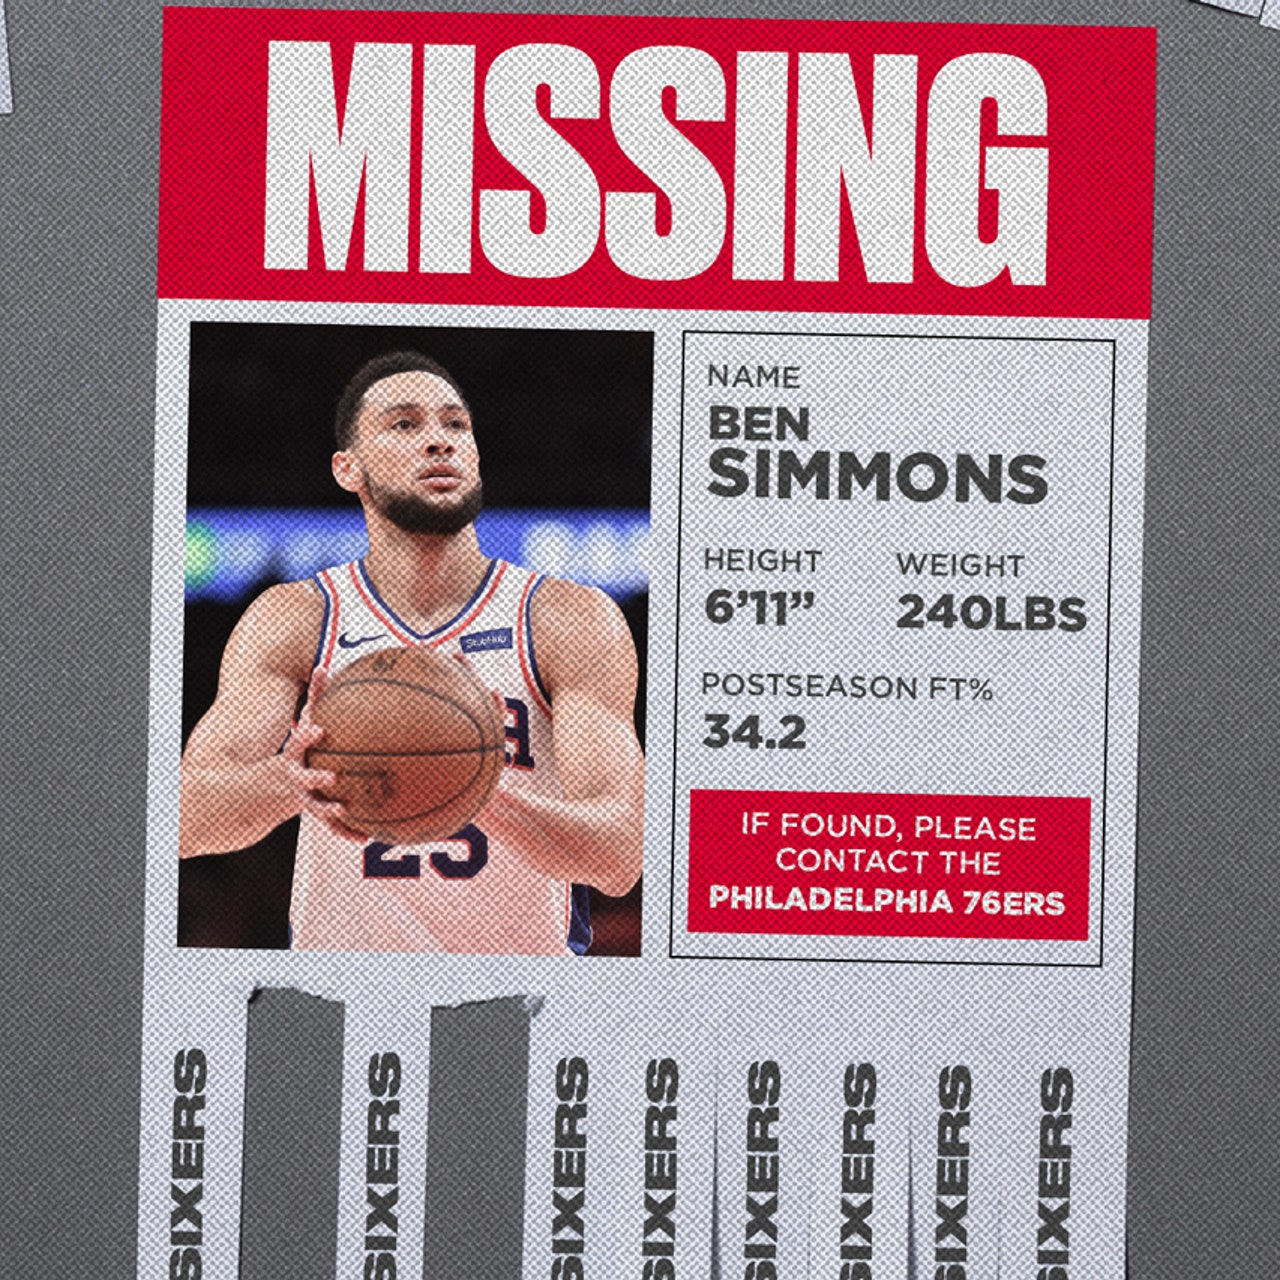 Could Ben Simmons Be Named All-Star In His Rookie Season?